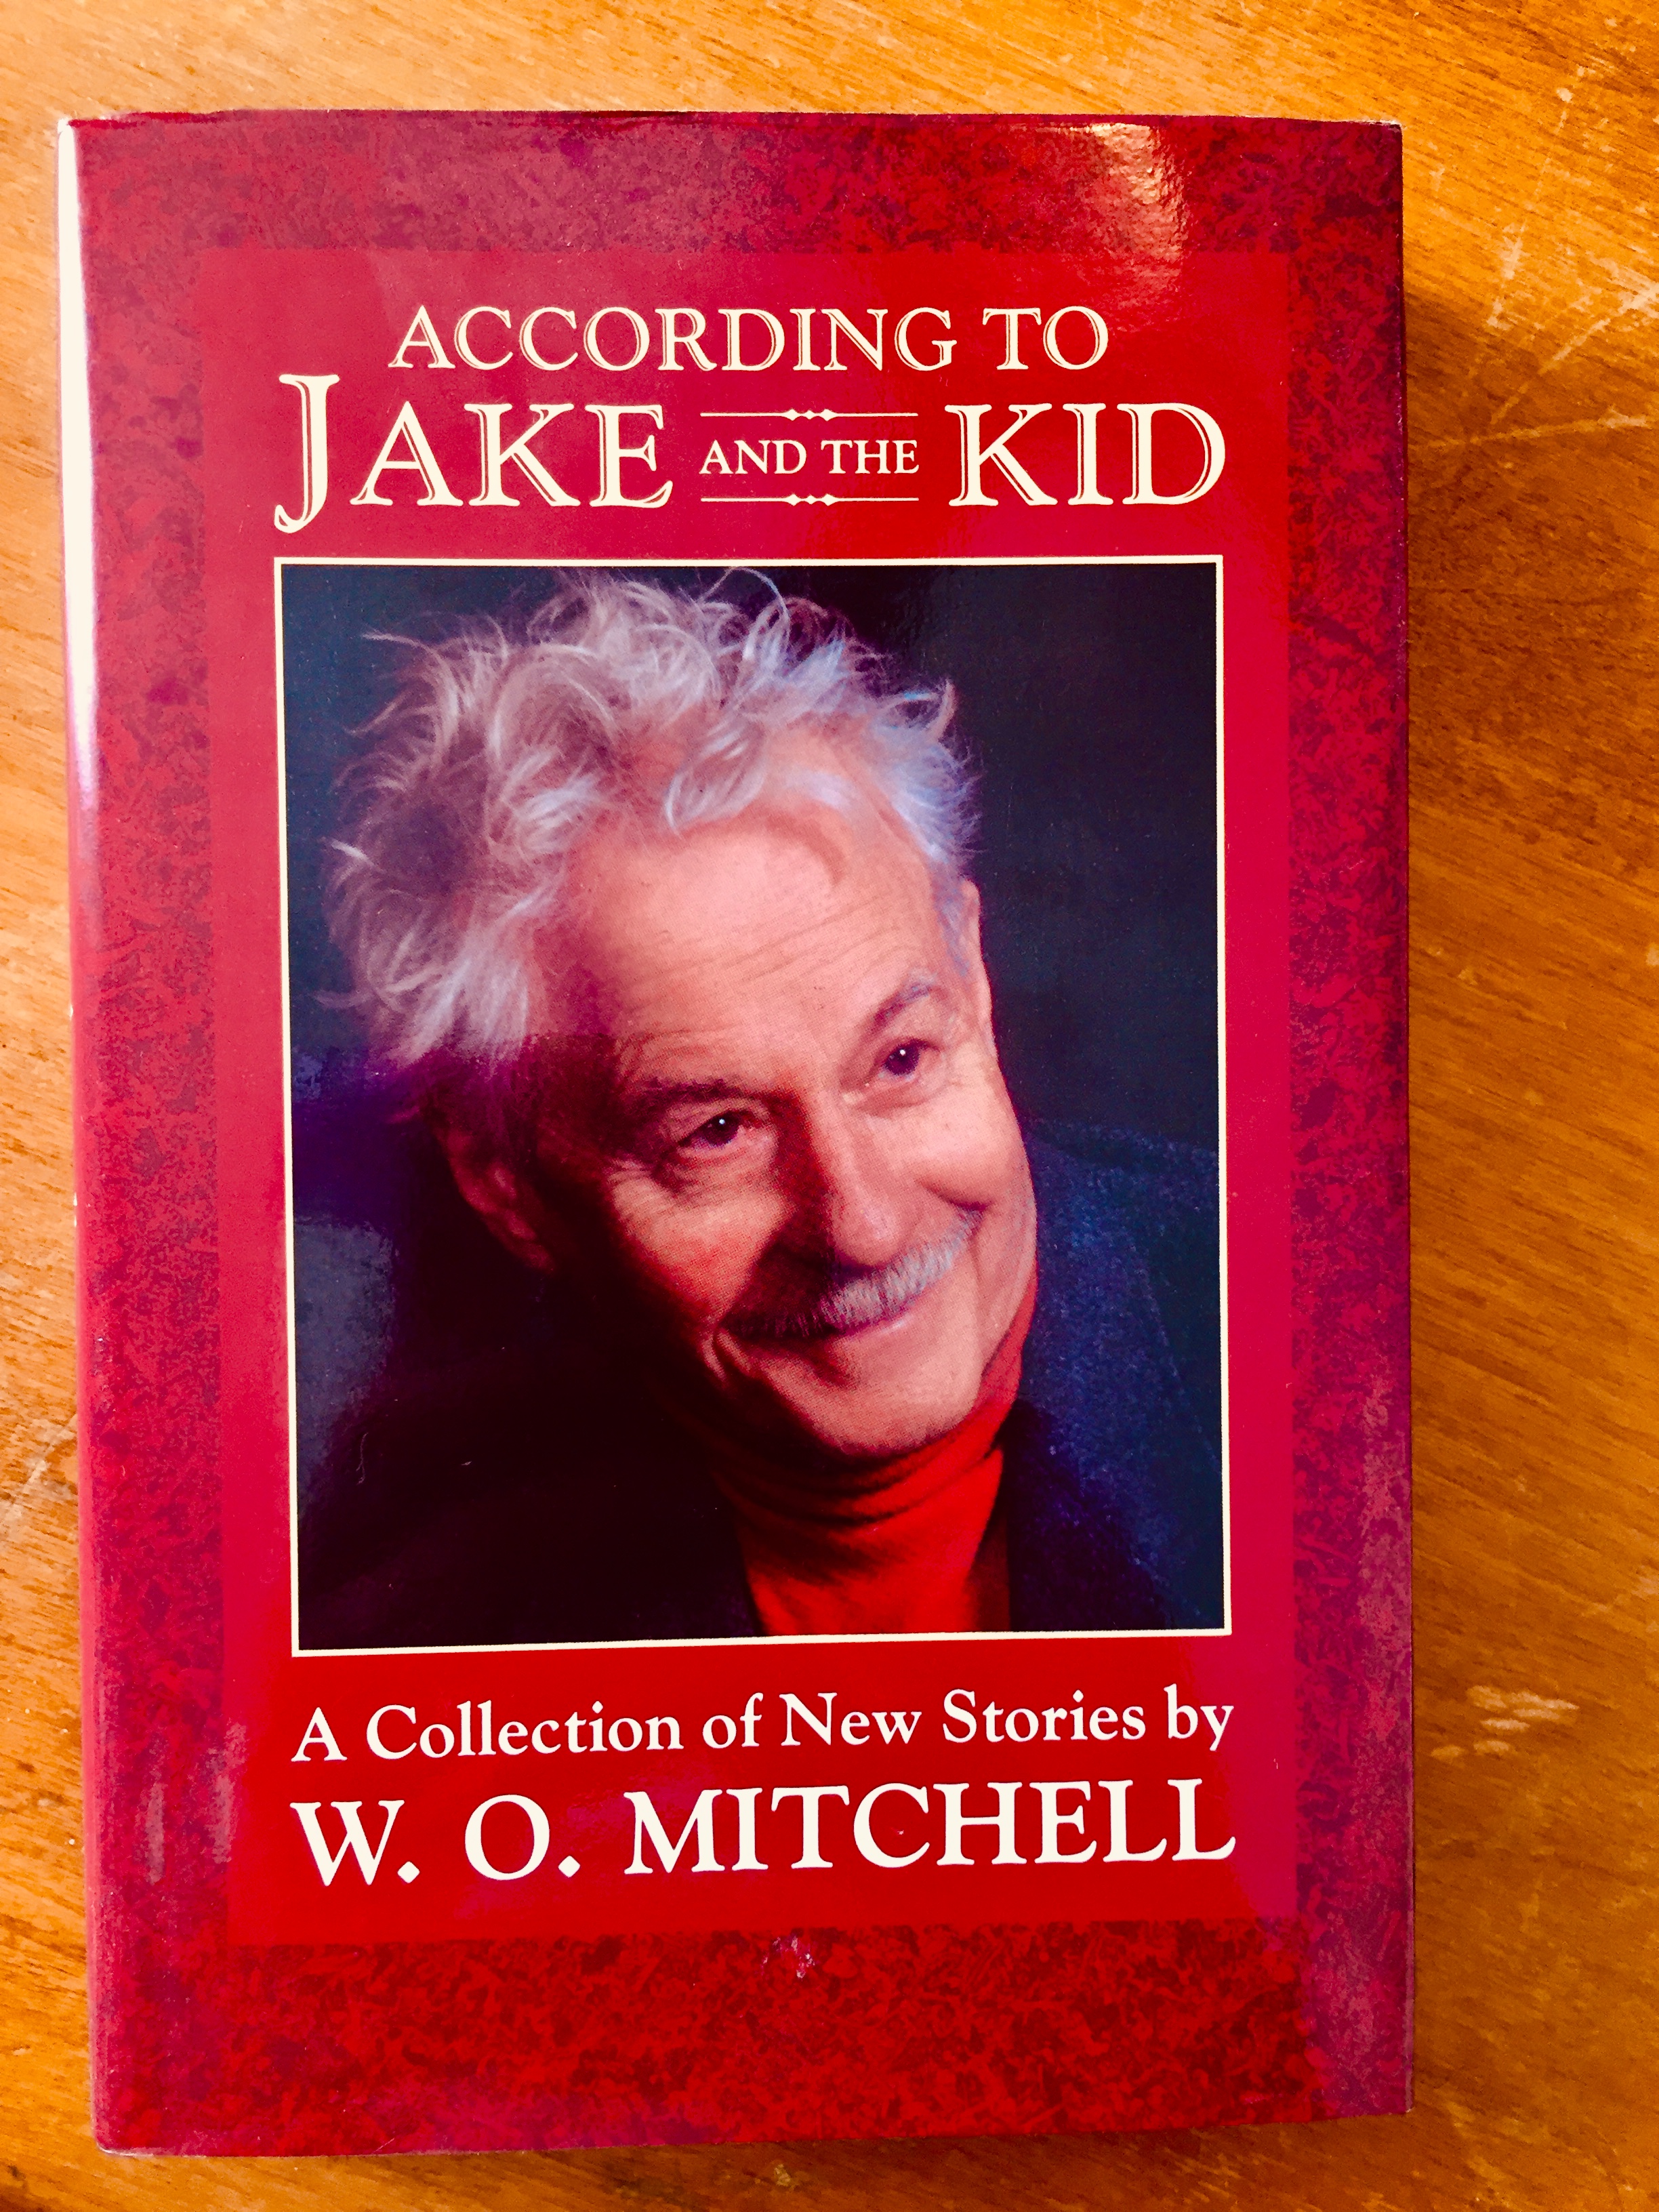 ACCORDING TO JAKE AND THE KID: Elbow Room; Gettin' Born; Jackrabbit Baby; Jake and the Medicine Man; King of All the Country; Well Well Well; Lo The Noble Redskin; The Man Who Came to Rummy; Mind Over Madam; Old Fakers Never Die; Going to a Fire - W. O. Mitchell